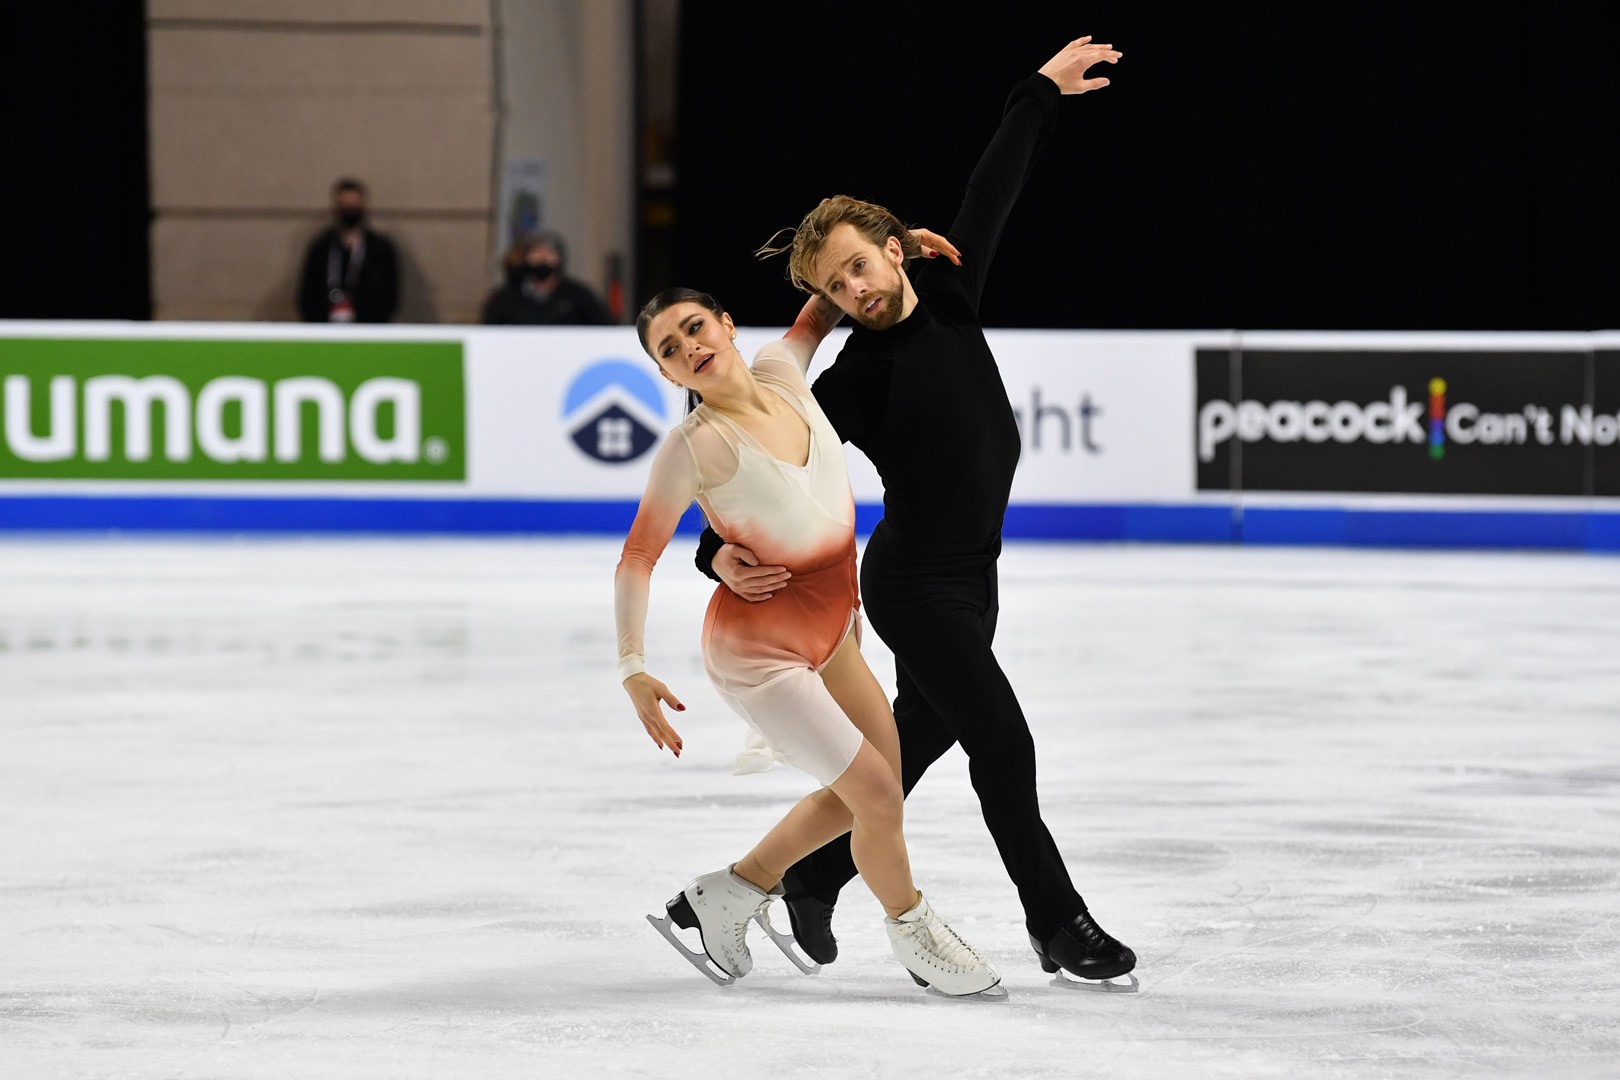 The worlds elite skaters discuss the joys and challenges of pursuing perfection on ice Arts and Culture Spokane The Pacific Northwest Inlander News, Politics, Music, Calendar, Events in